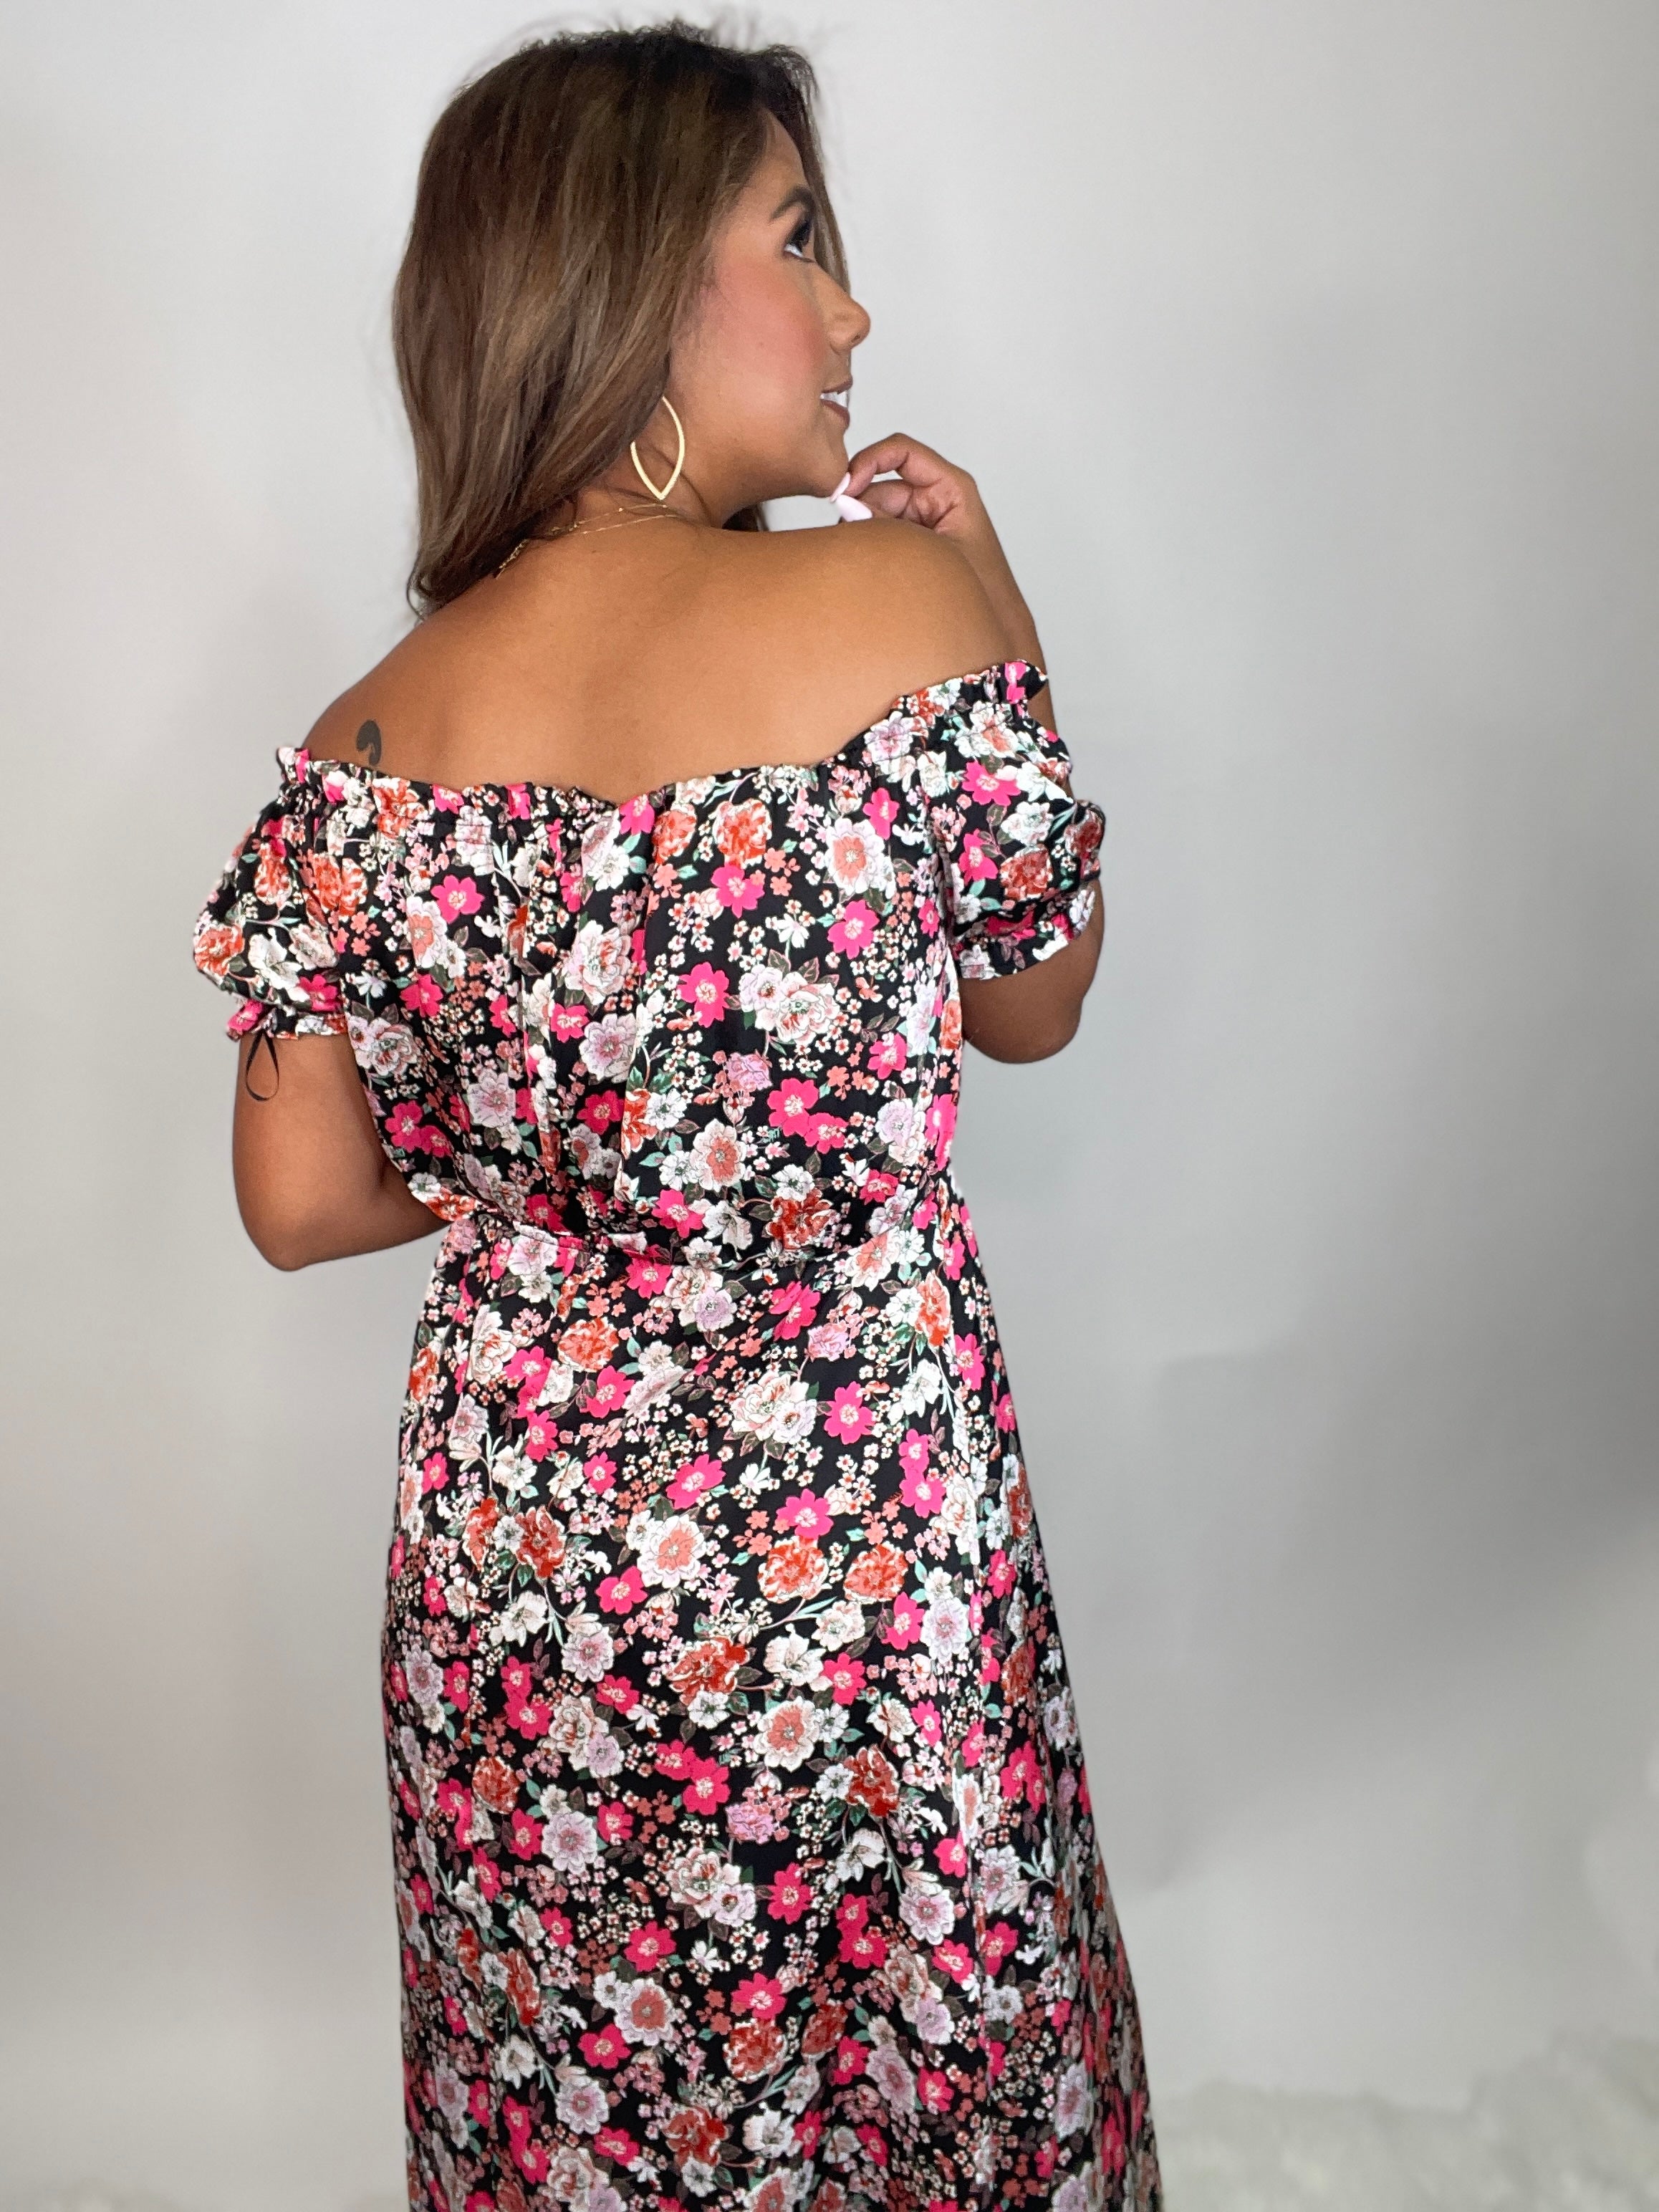 The Blossoming Floral Maxi Dress